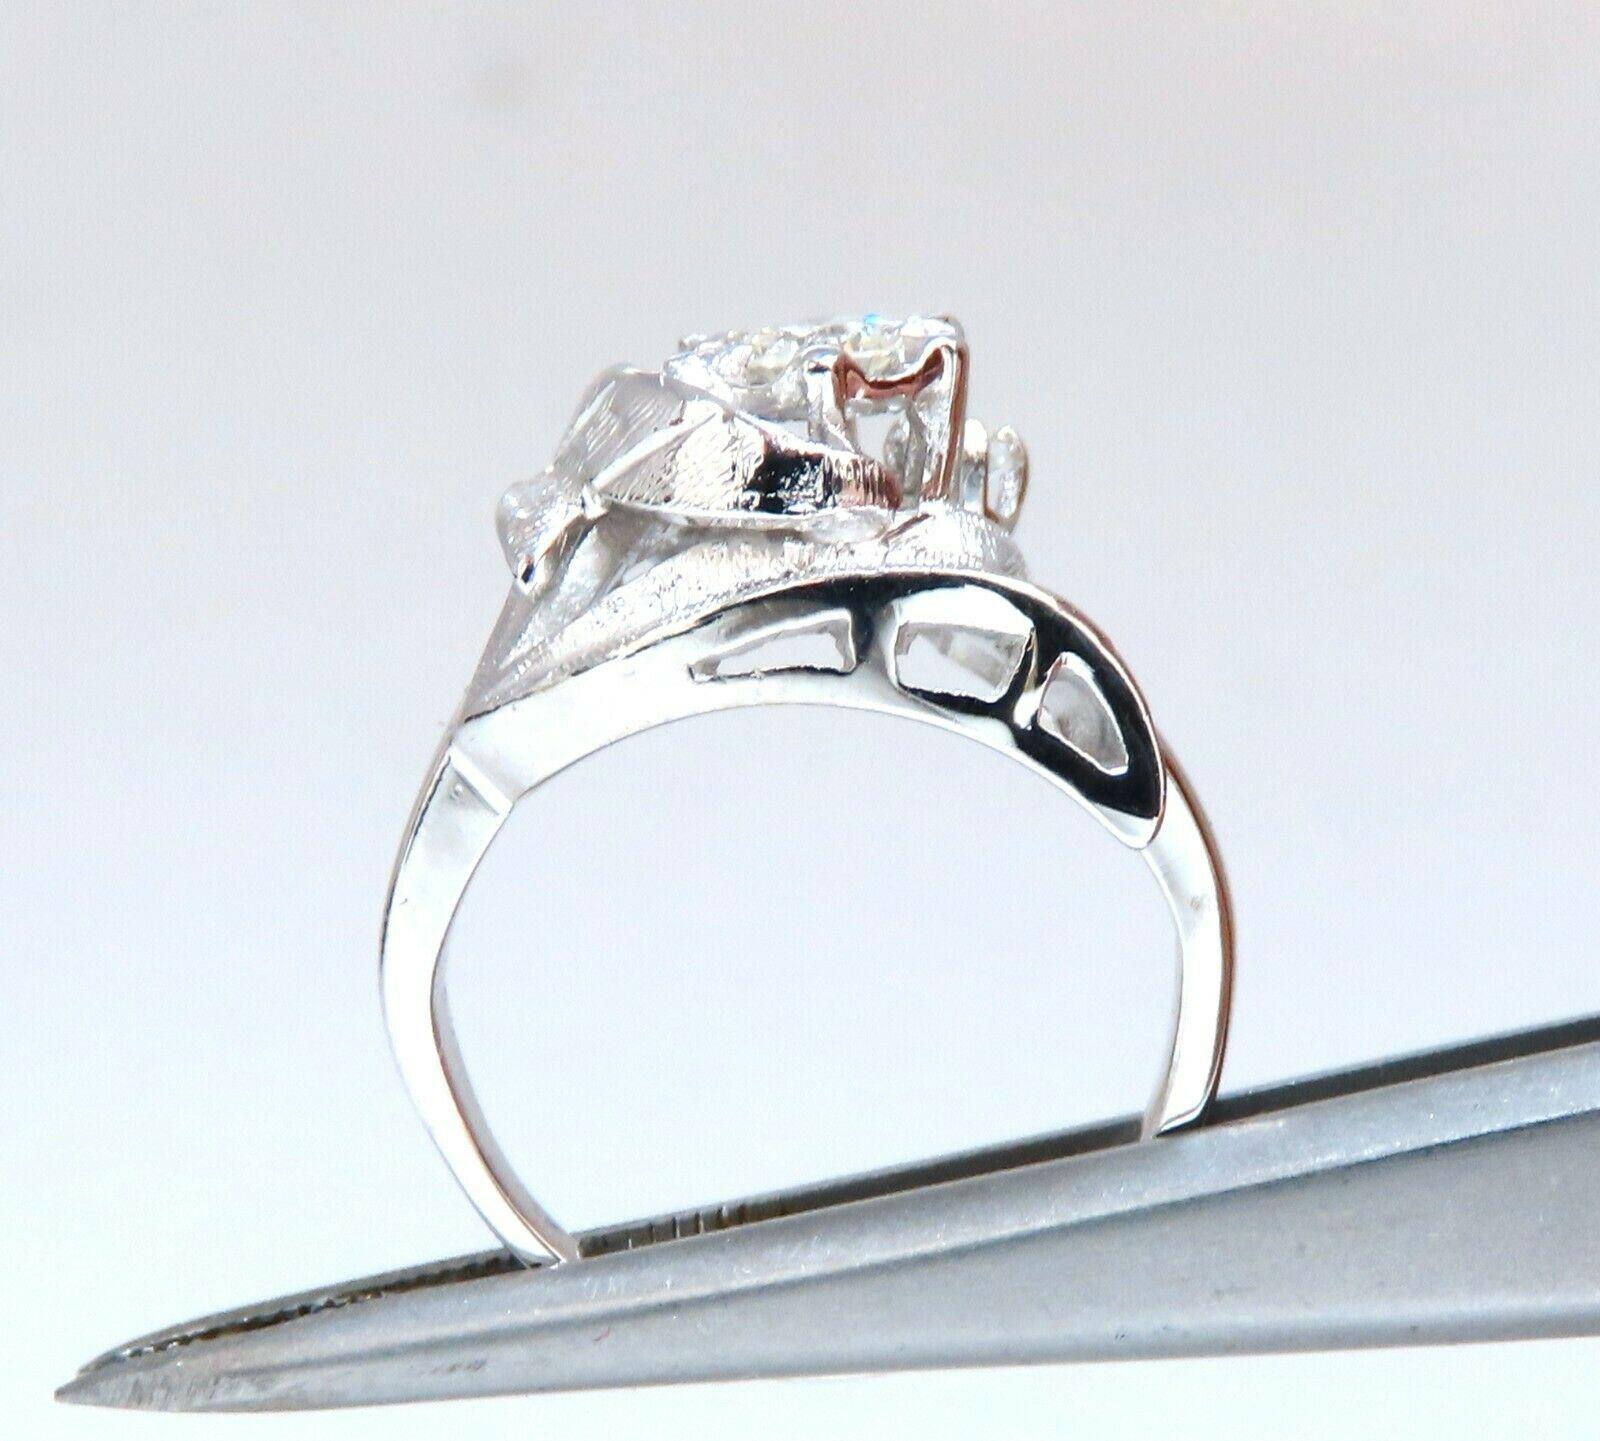 Victorian Revival Deco

.20ct Natural Diamonds ring.

Single cut brilliant Round: 3.6mm diameter

VS2 Clean clarity

H-color

14Kt. White gold

Ring size: 3.5

Ring measures:

11mm wide

7.2mm depth

weight of ring: 3.4 Grams.

Resizing is possible.